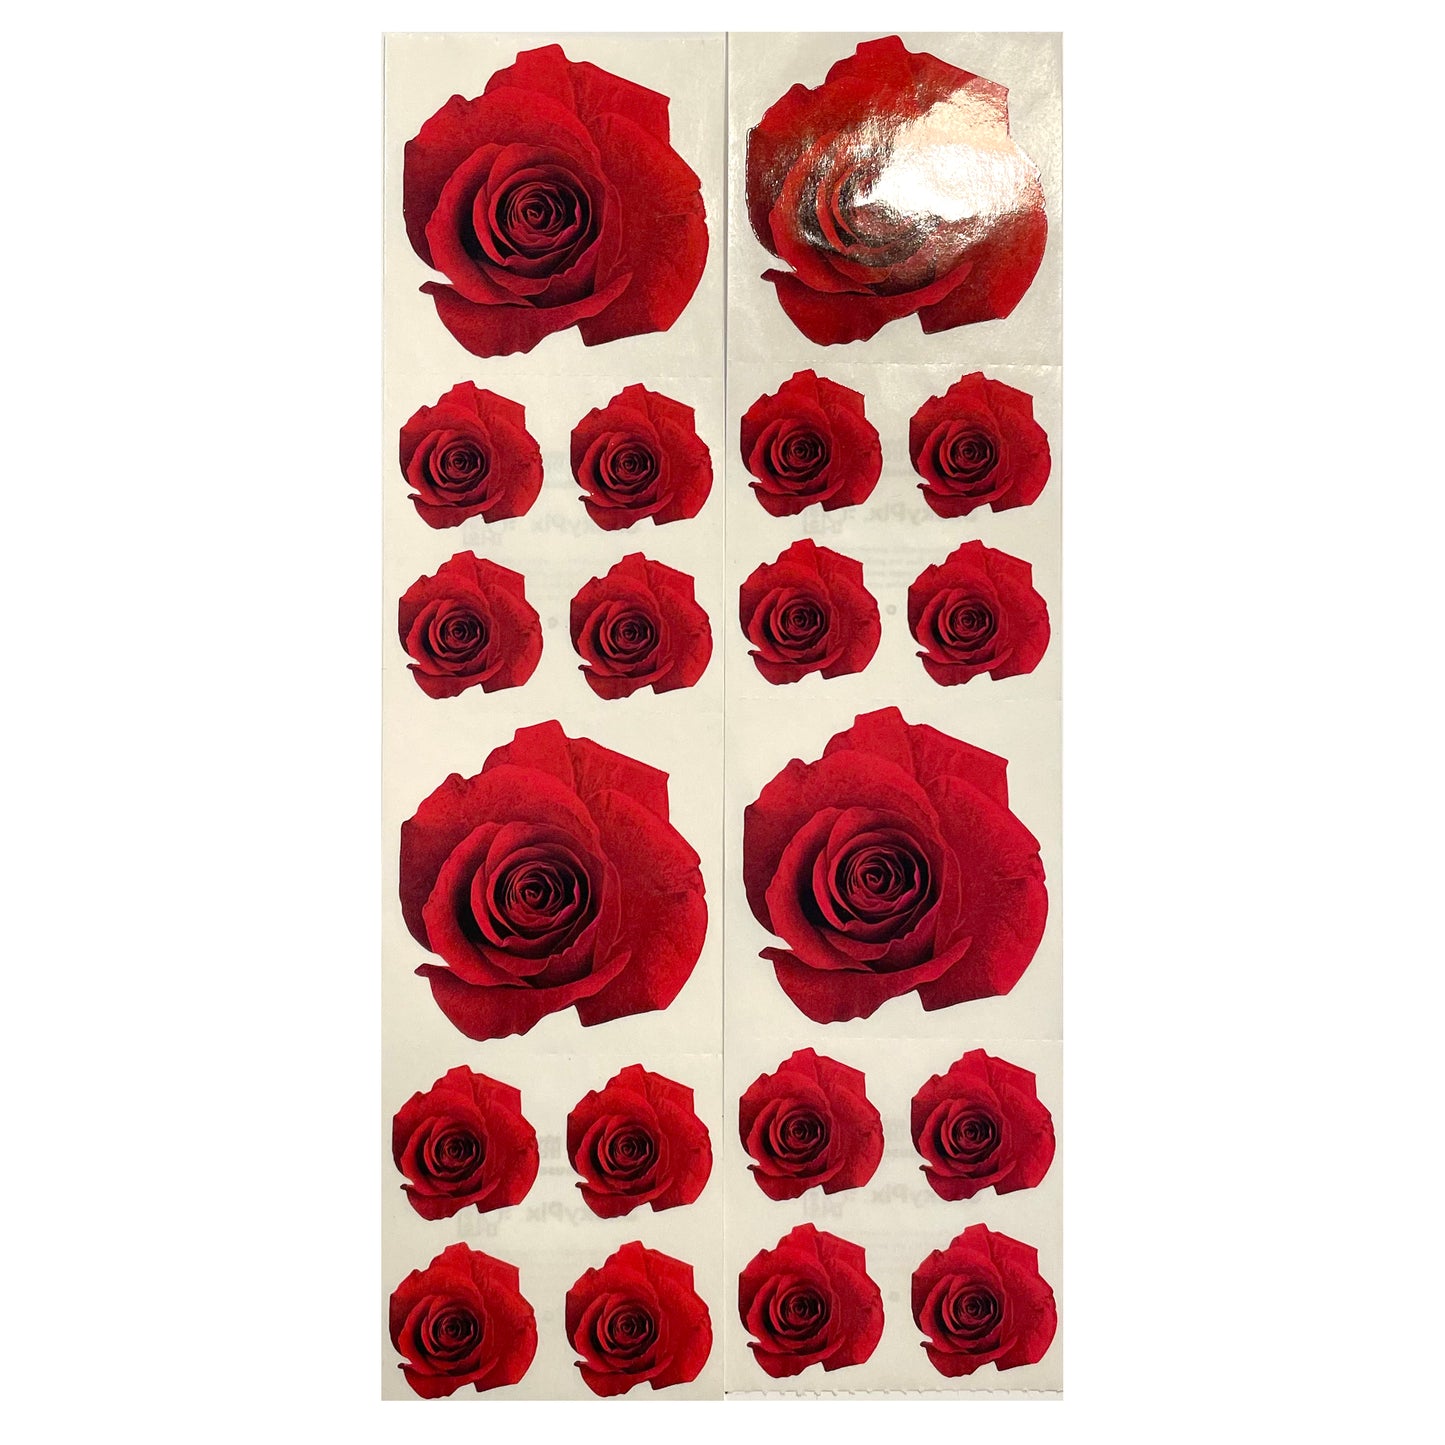 Paper House: Photoreal Red Rose stickers